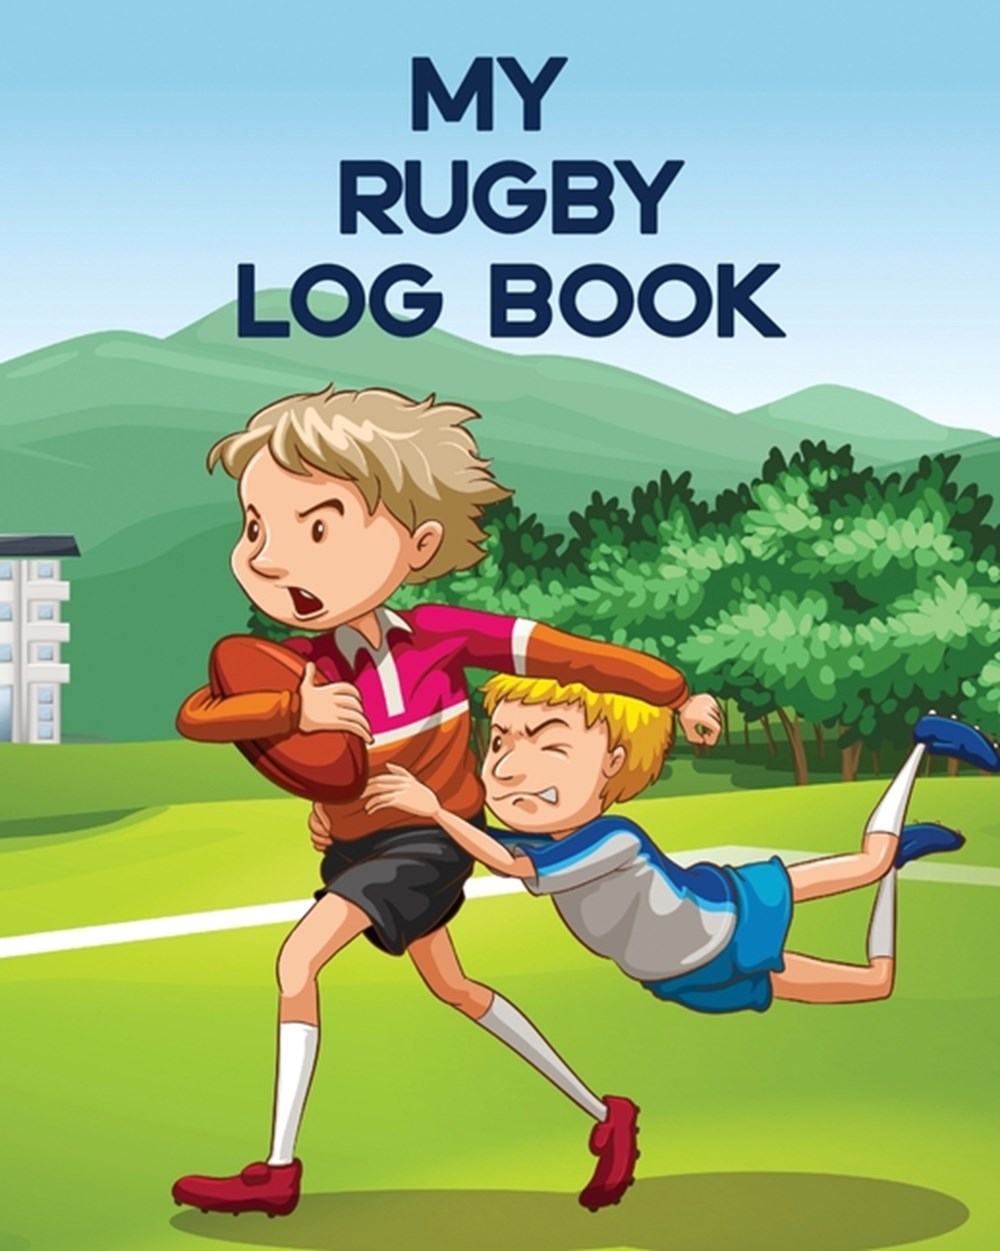 My Rugby Log Book: Outdoor Sports For Kids - Coach Team Training - League Players